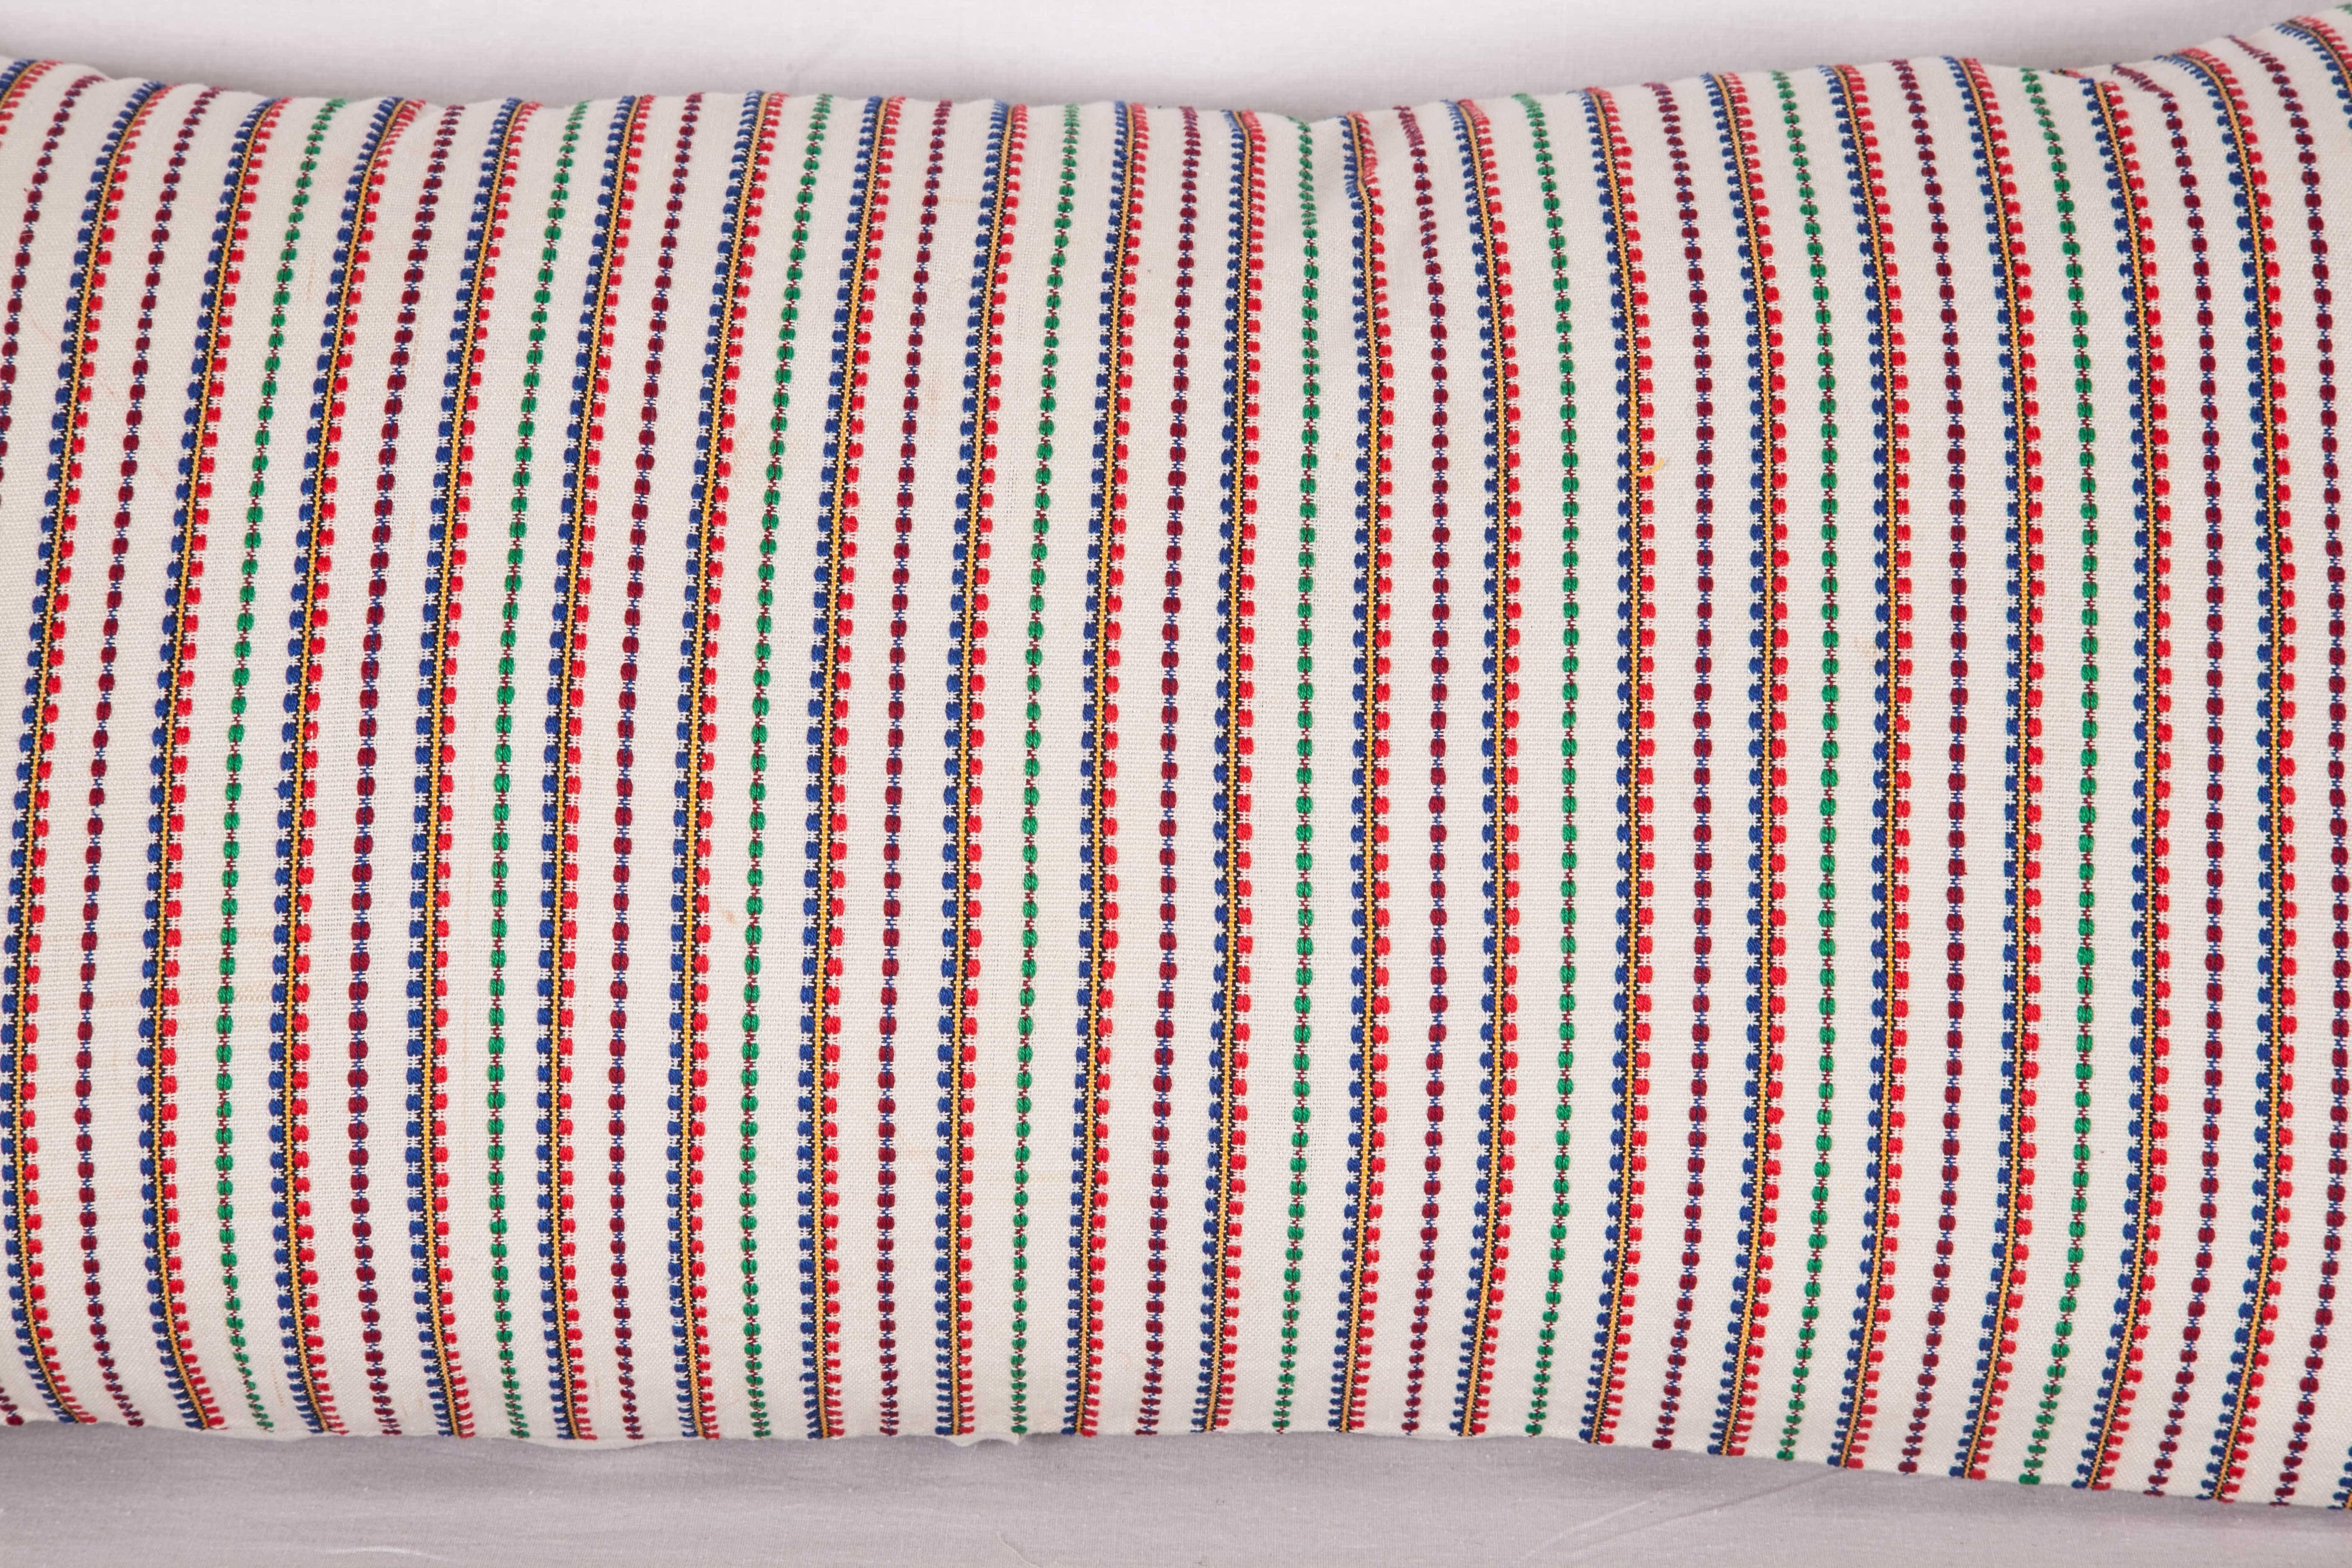 The pillow is made out of a mid-20 century, Balkan (Bulgarian?) textile.
It does not come with an insert but it comes with a bag made to the size and out of cotton to accommodate the filling.
The backing is made of linen.
Please note filling is